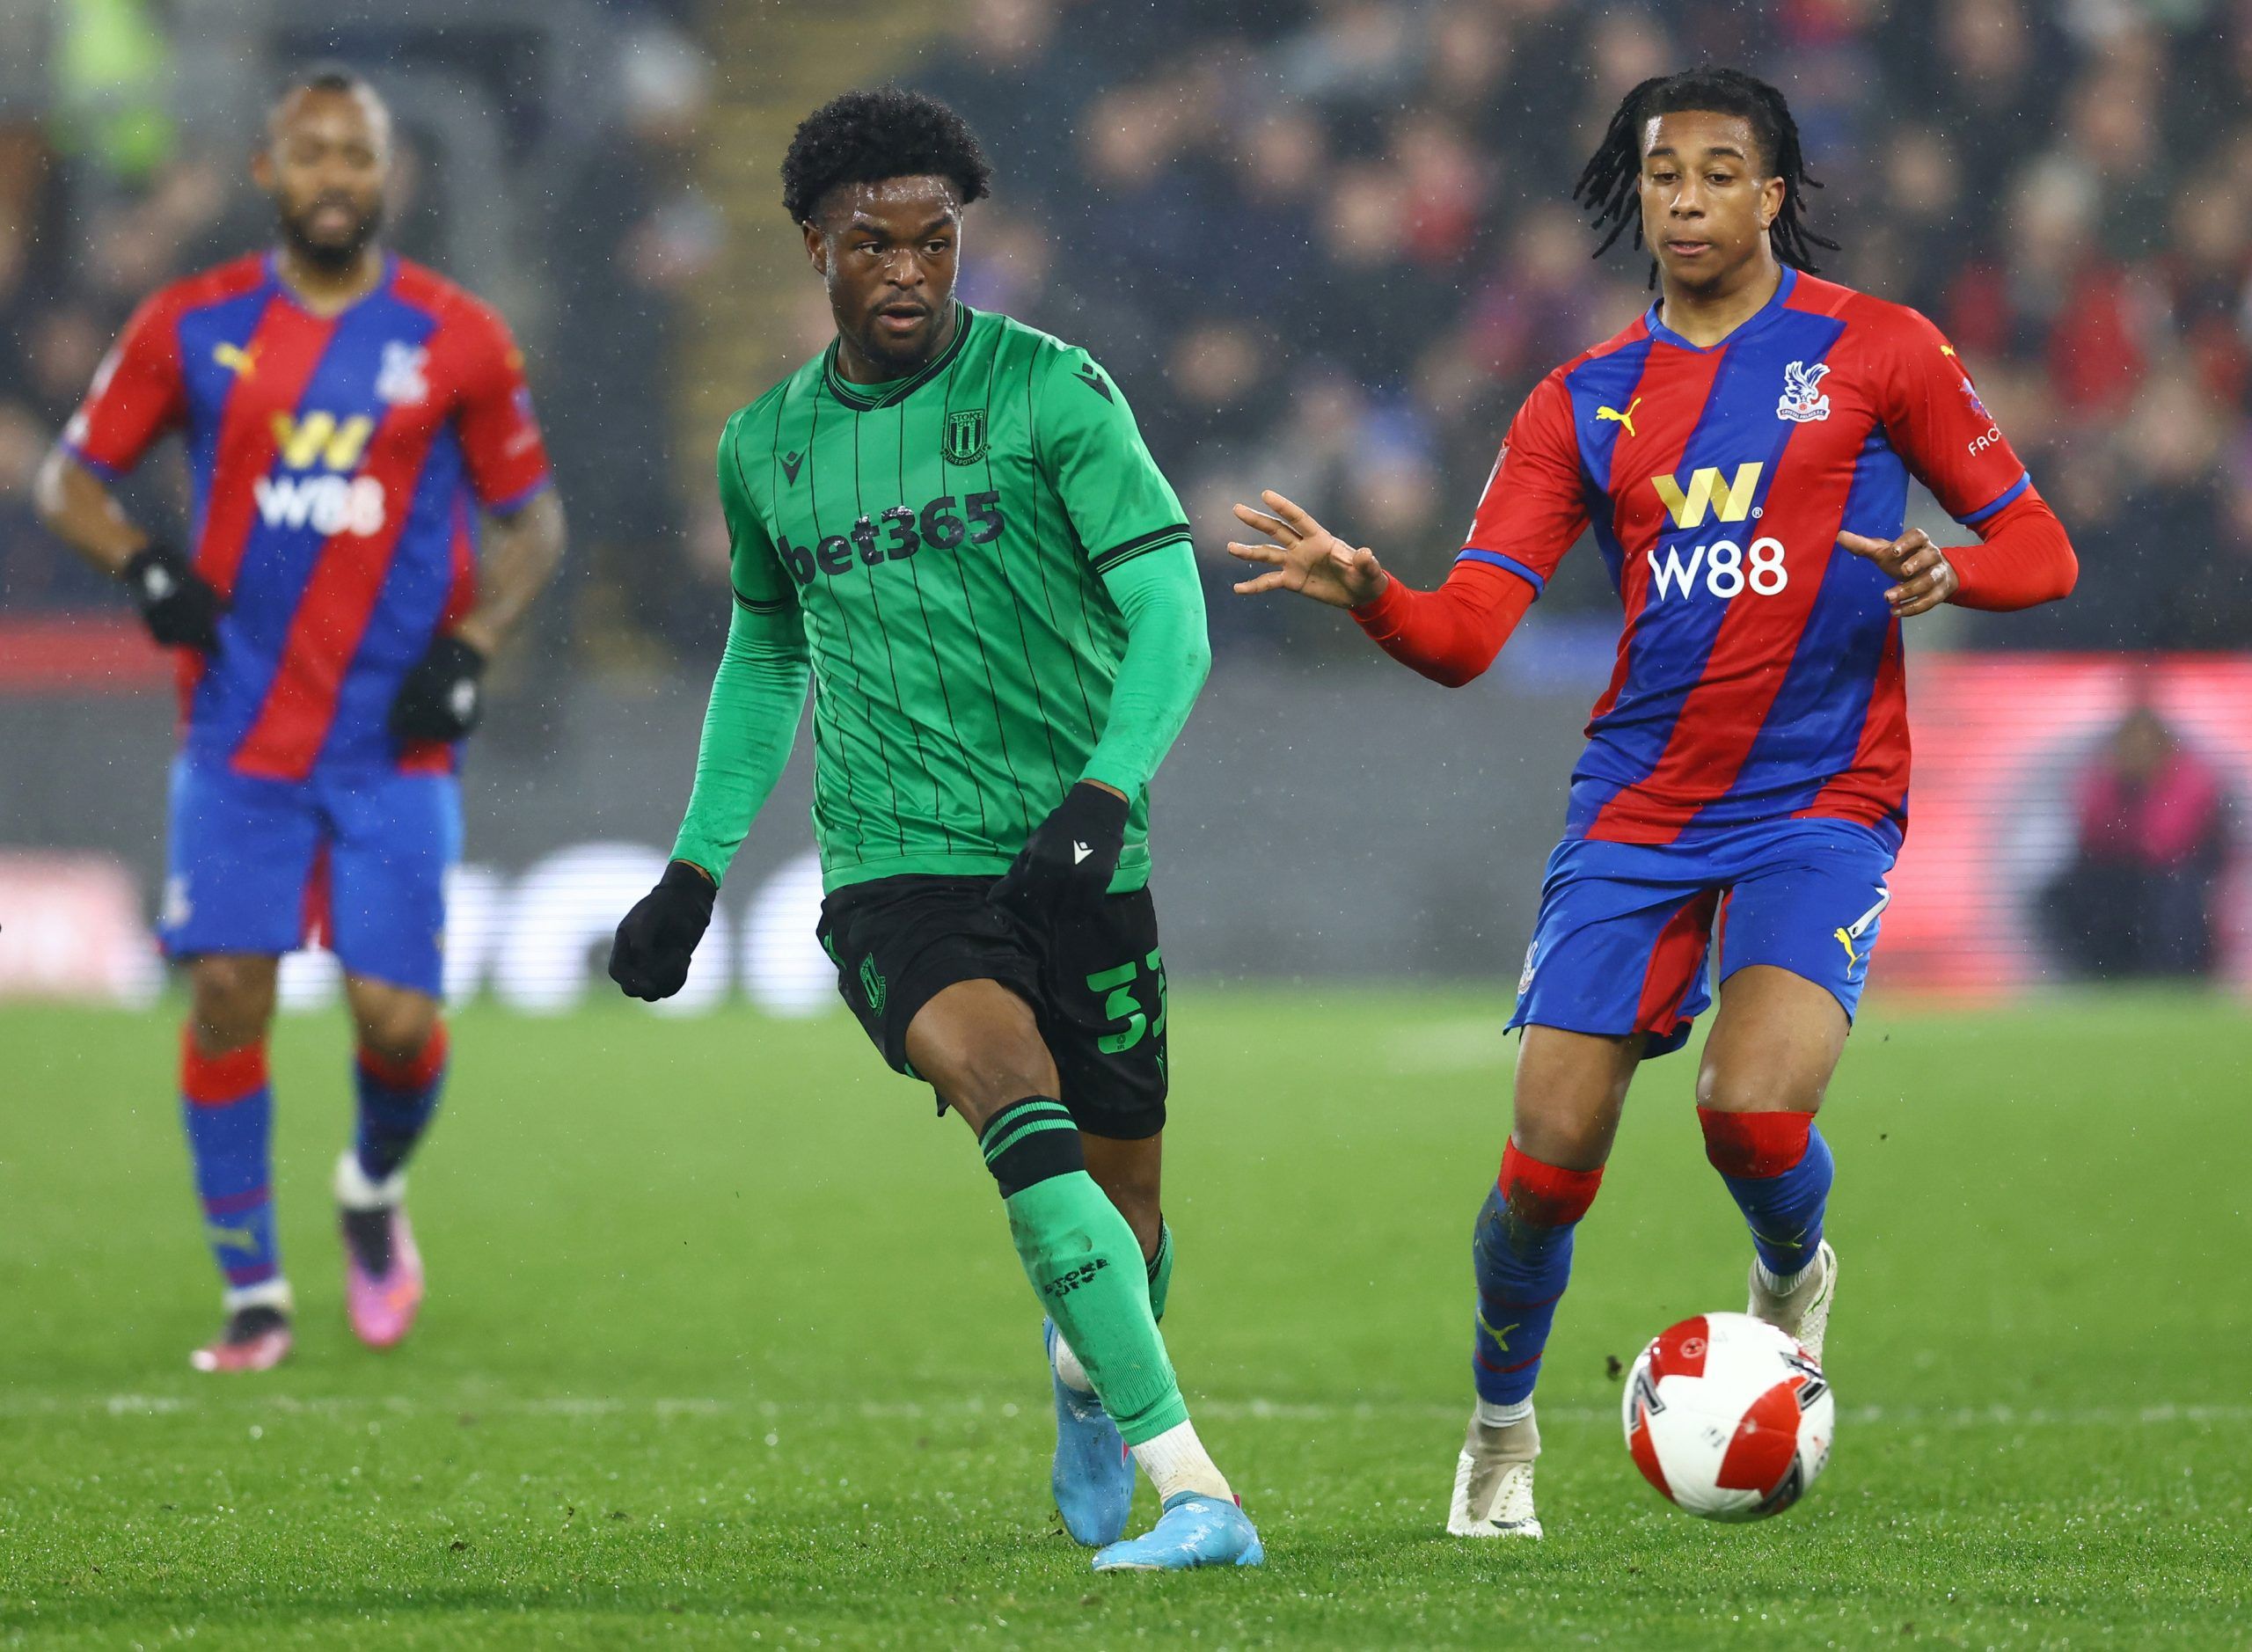 Soccer Football - FA Cup Fifth Round - Crystal Palace v Stoke City - Selhurst Park, London, Britain - March 1, 2022 Stoke City's Josh Maja in action with Crystal Palace's Michael Olise REUTERS/David Klein